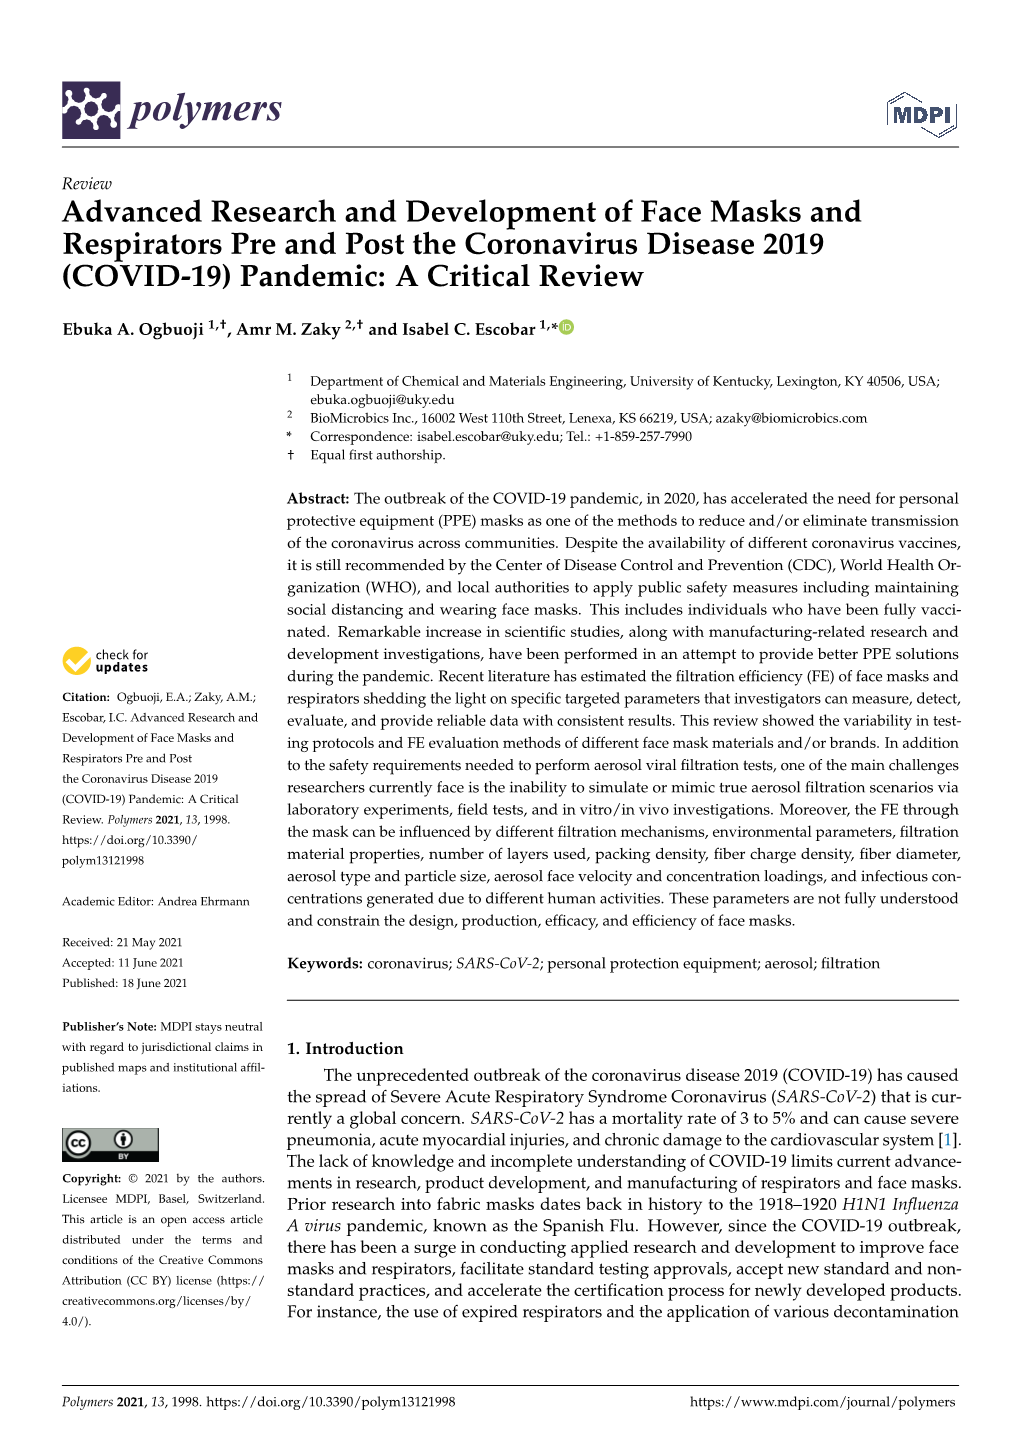 Advanced Research and Development of Face Masks and Respirators Pre and Post the Coronavirus Disease 2019 (COVID-19) Pandemic: a Critical Review